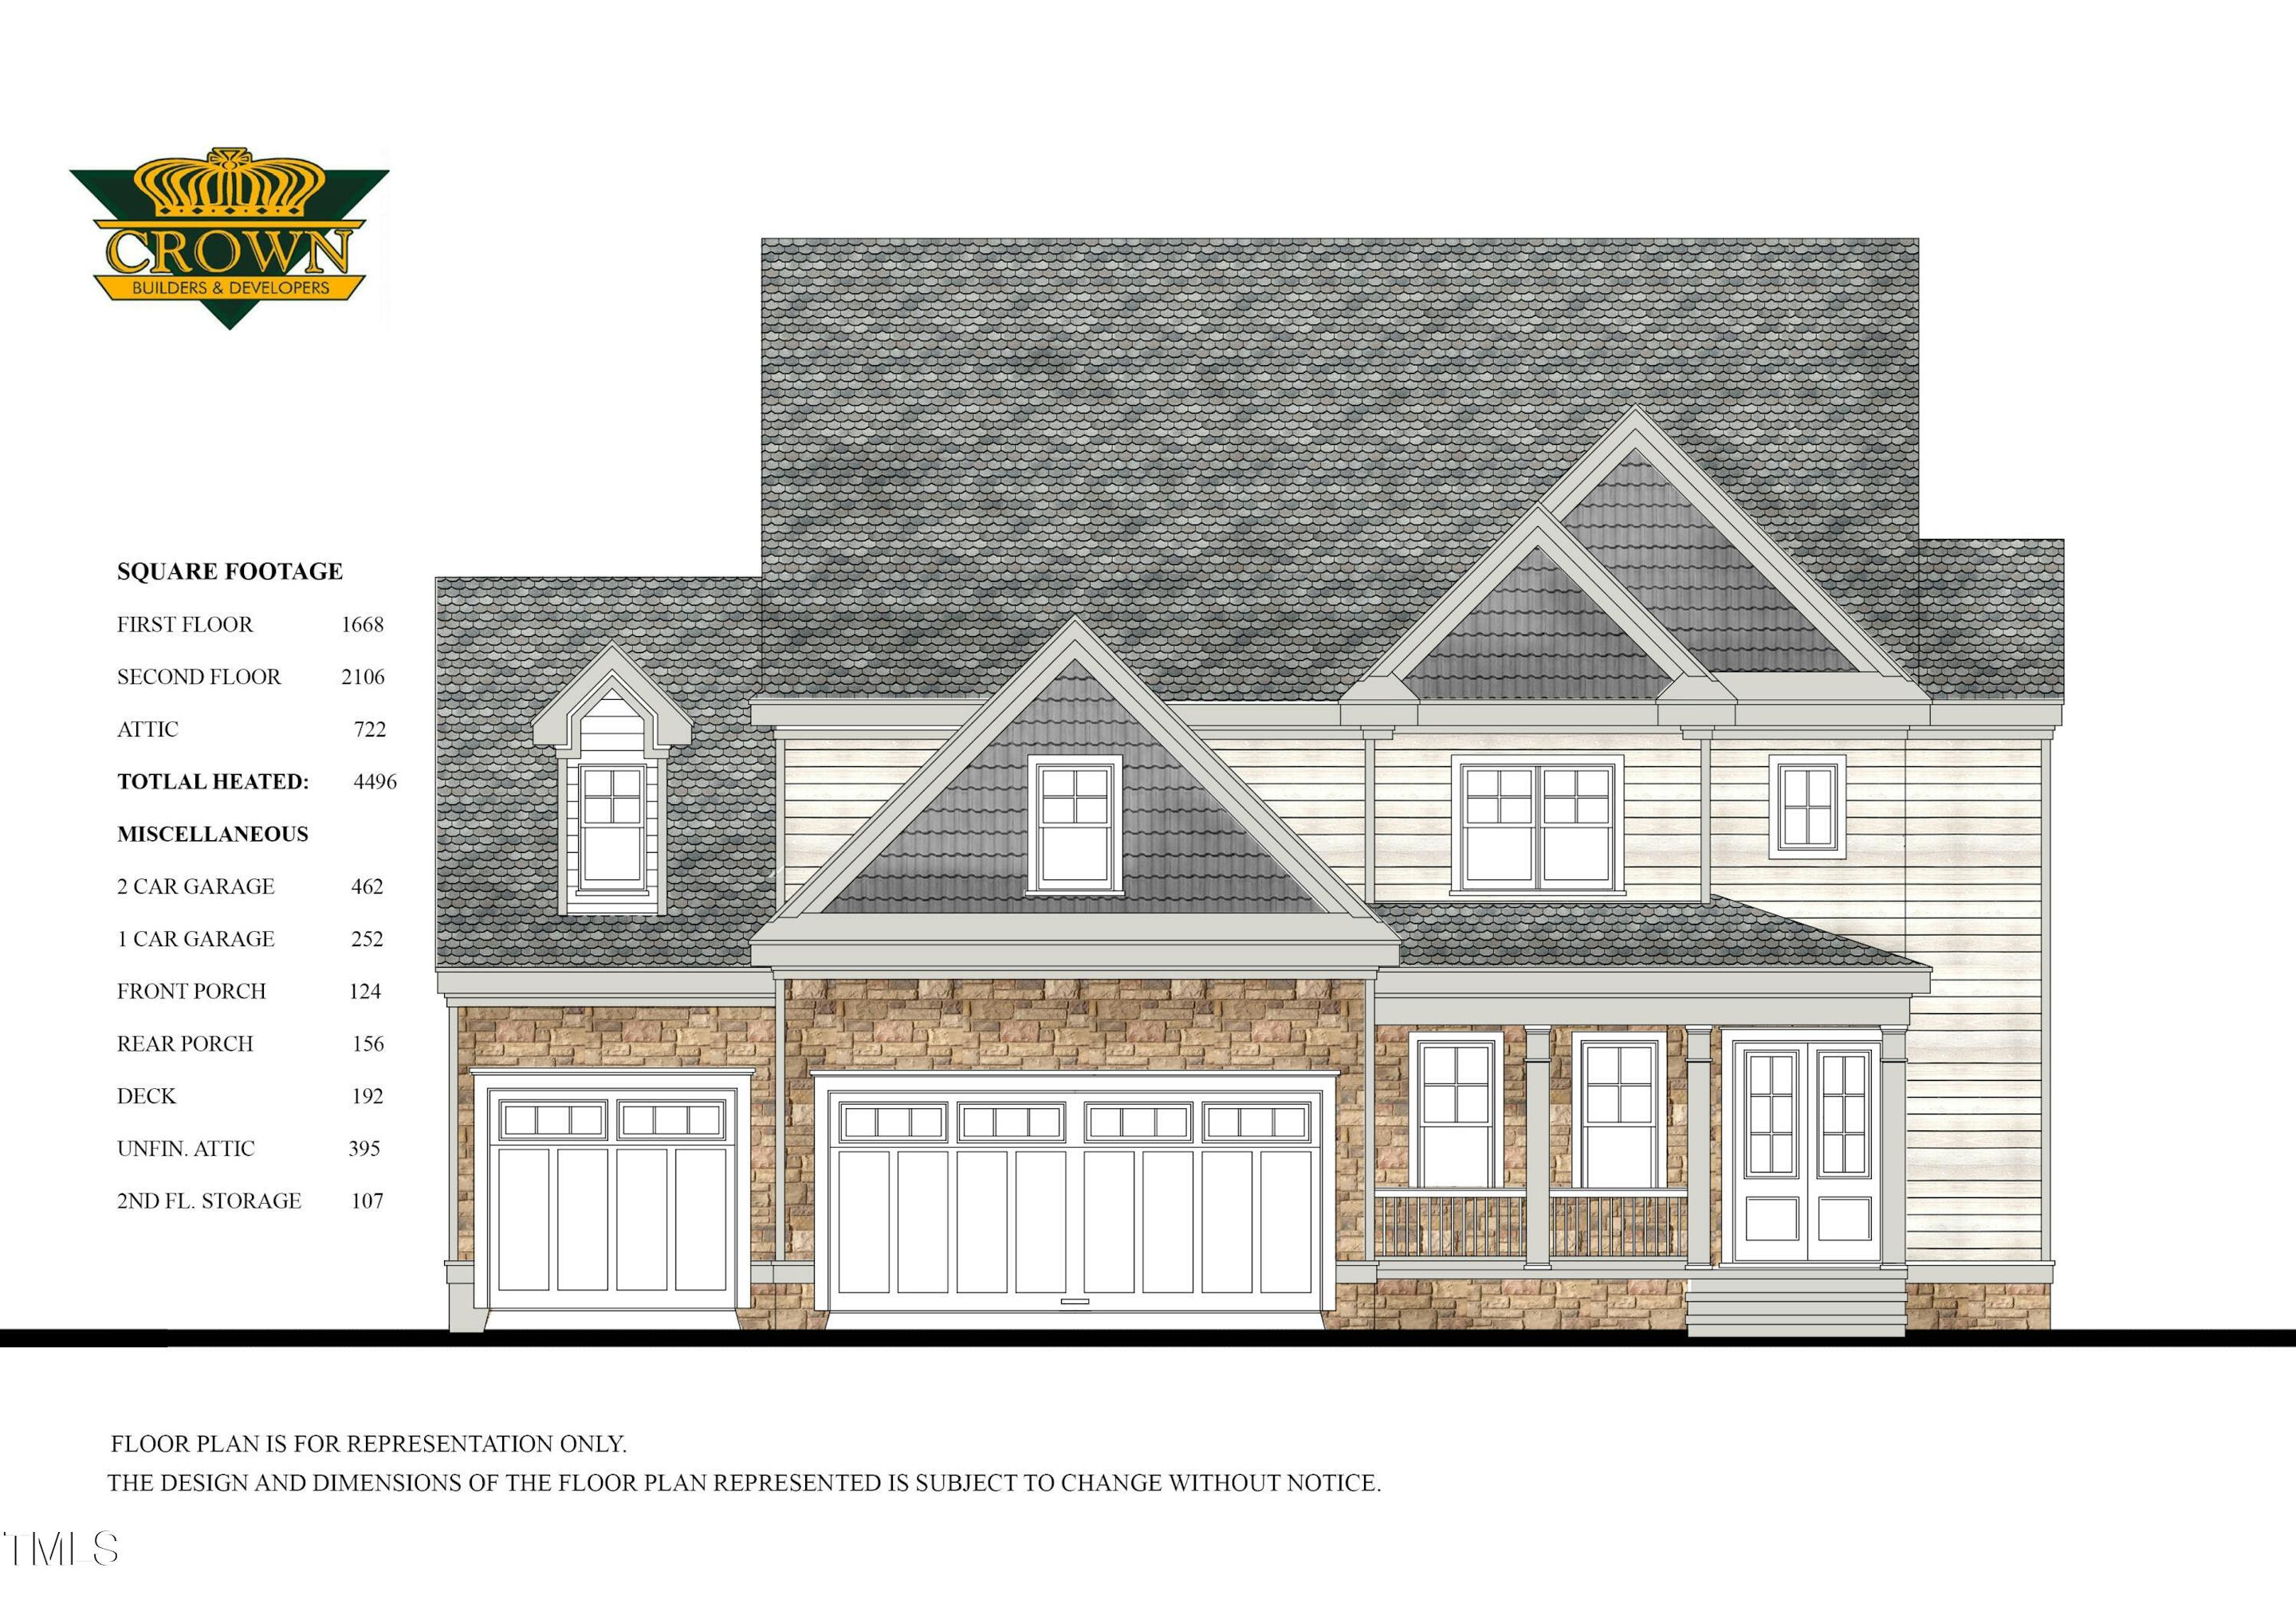 LOT 7 ELEVATION PICTURE